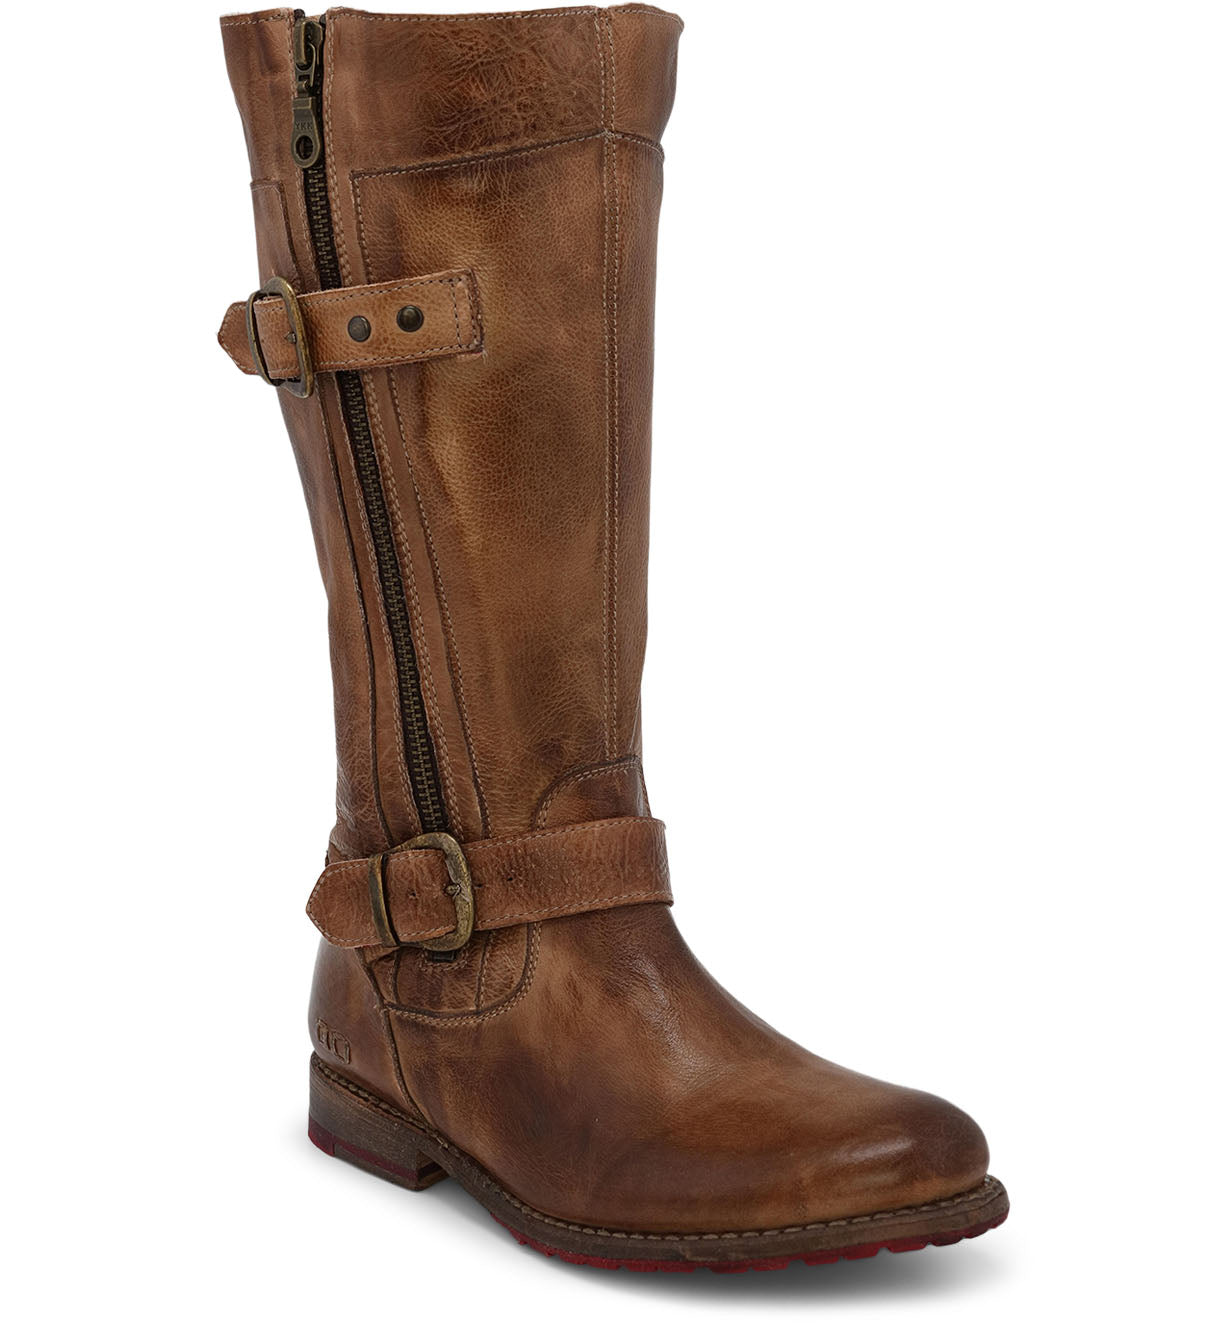 A women's Gogo Lug Wide Calf brown leather boot with buckles and zippers by Bed Stu.